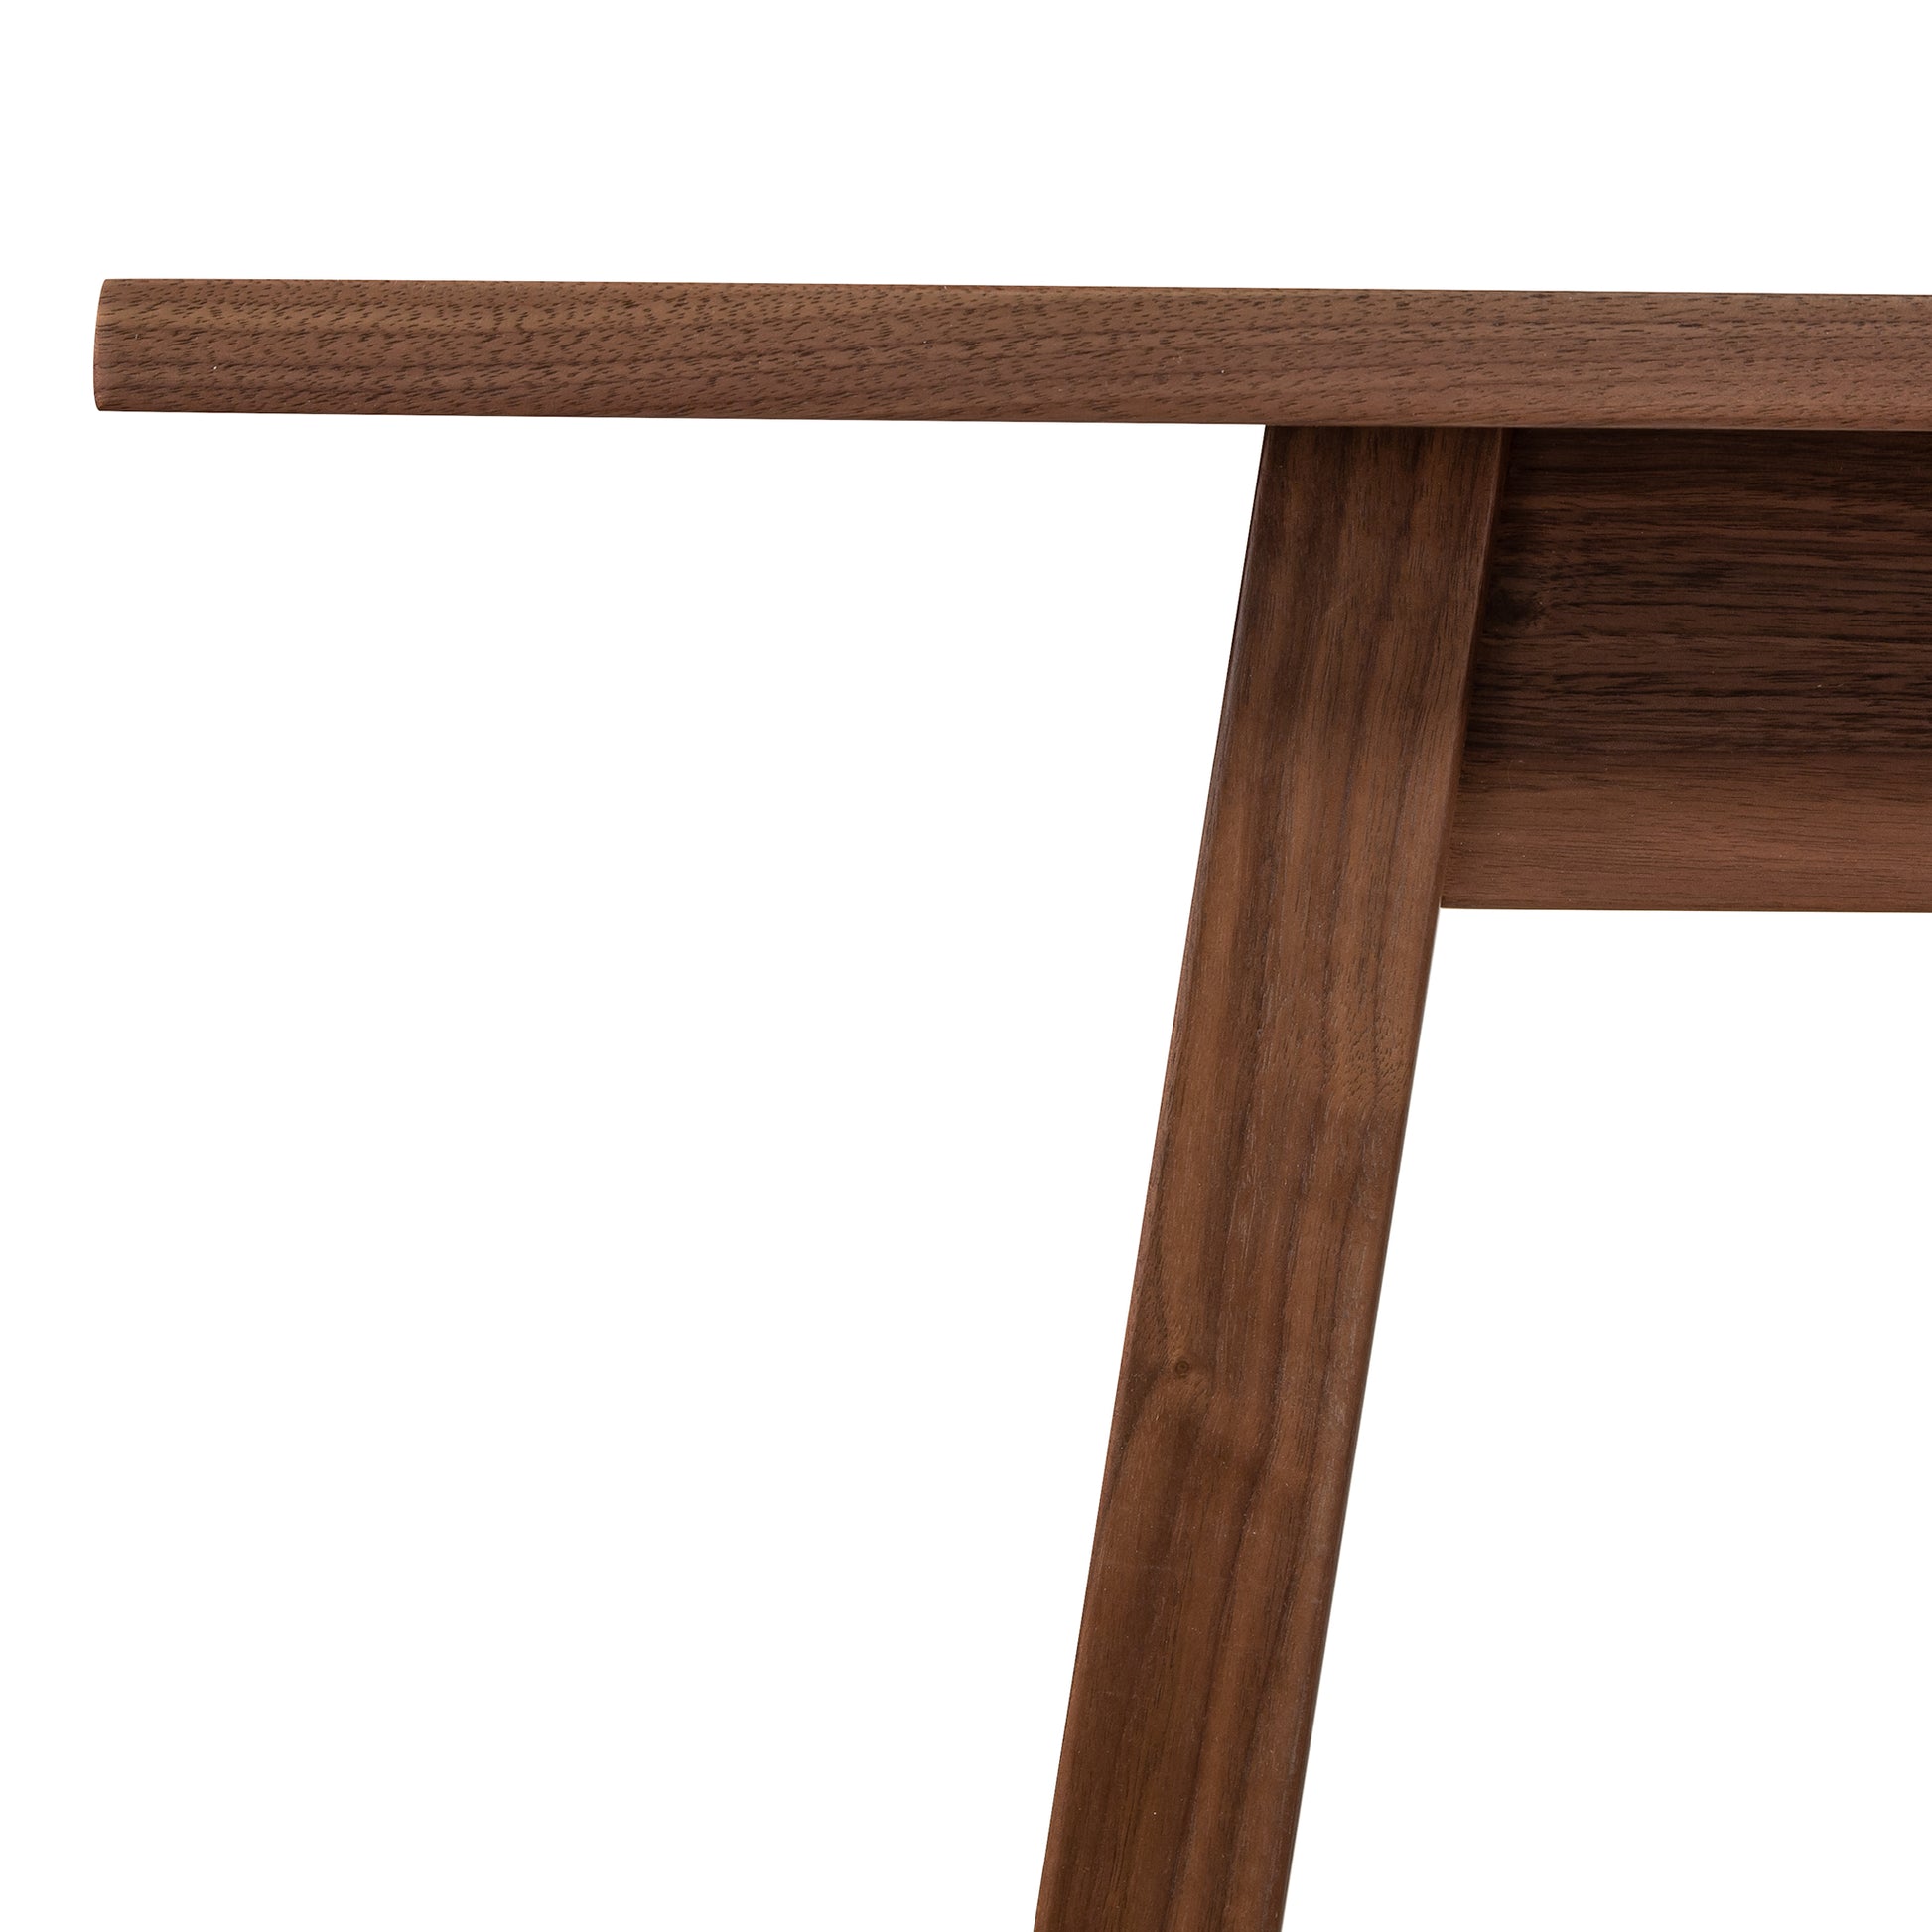 A close up image of a walnut dining table.